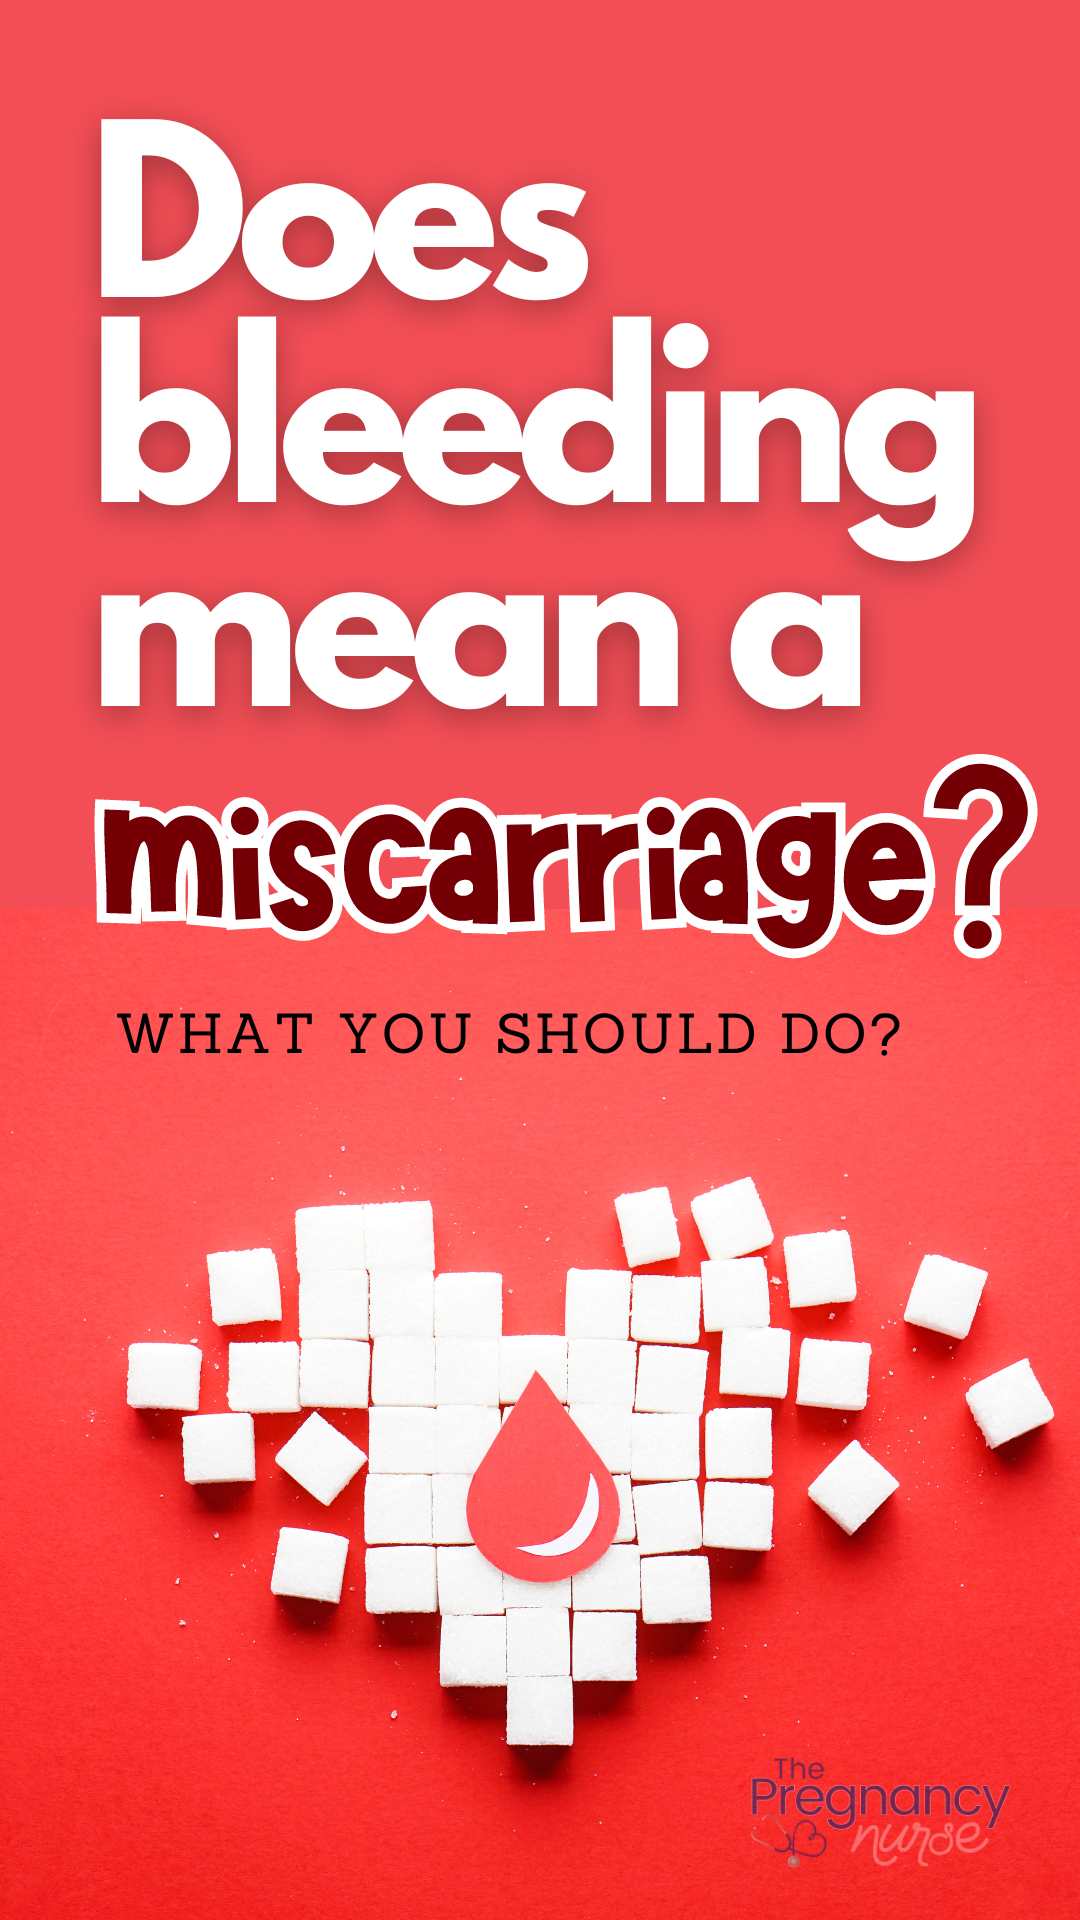 Found yourself bleeding during early pregnancy and unsure of what to do? Follow along as Hilary The Pregnancy Nurse®, provides a step-by-step guide on how to response, inclusive of when to call your provider, what information to provide, and what to expect in terms of medical interventions. Remember, your safety and the safety of your baby remains paramount.